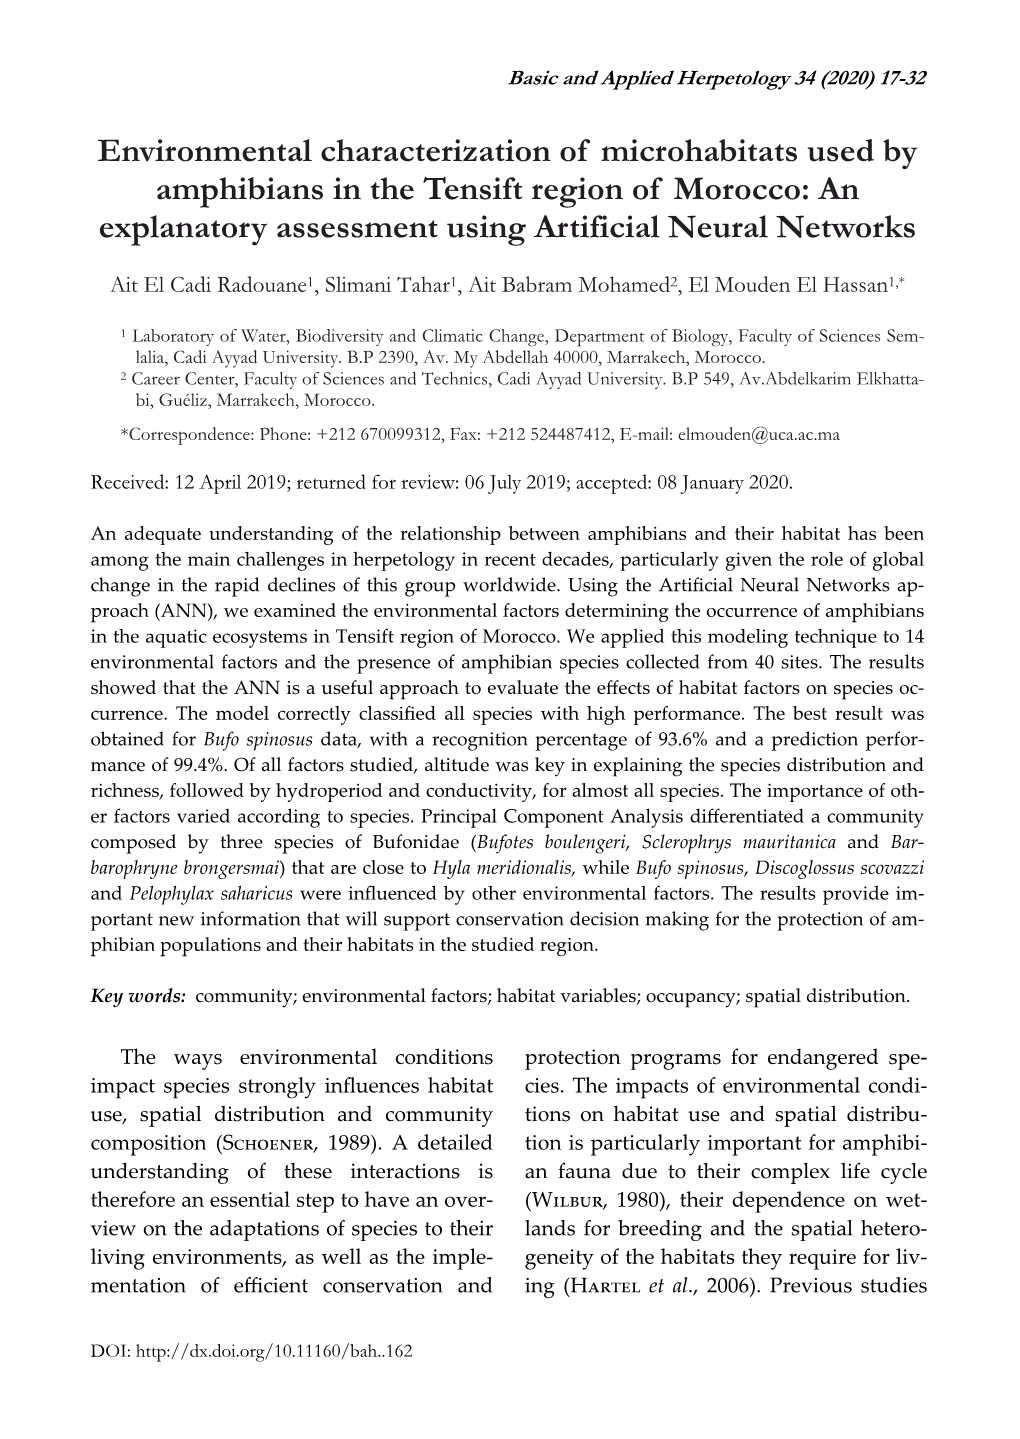 Environmental Characterization of Microhabitats Used by Amphibians in the Tensift Region of Morocco: an Explanatory Assessment Using Artificial Neural Networks